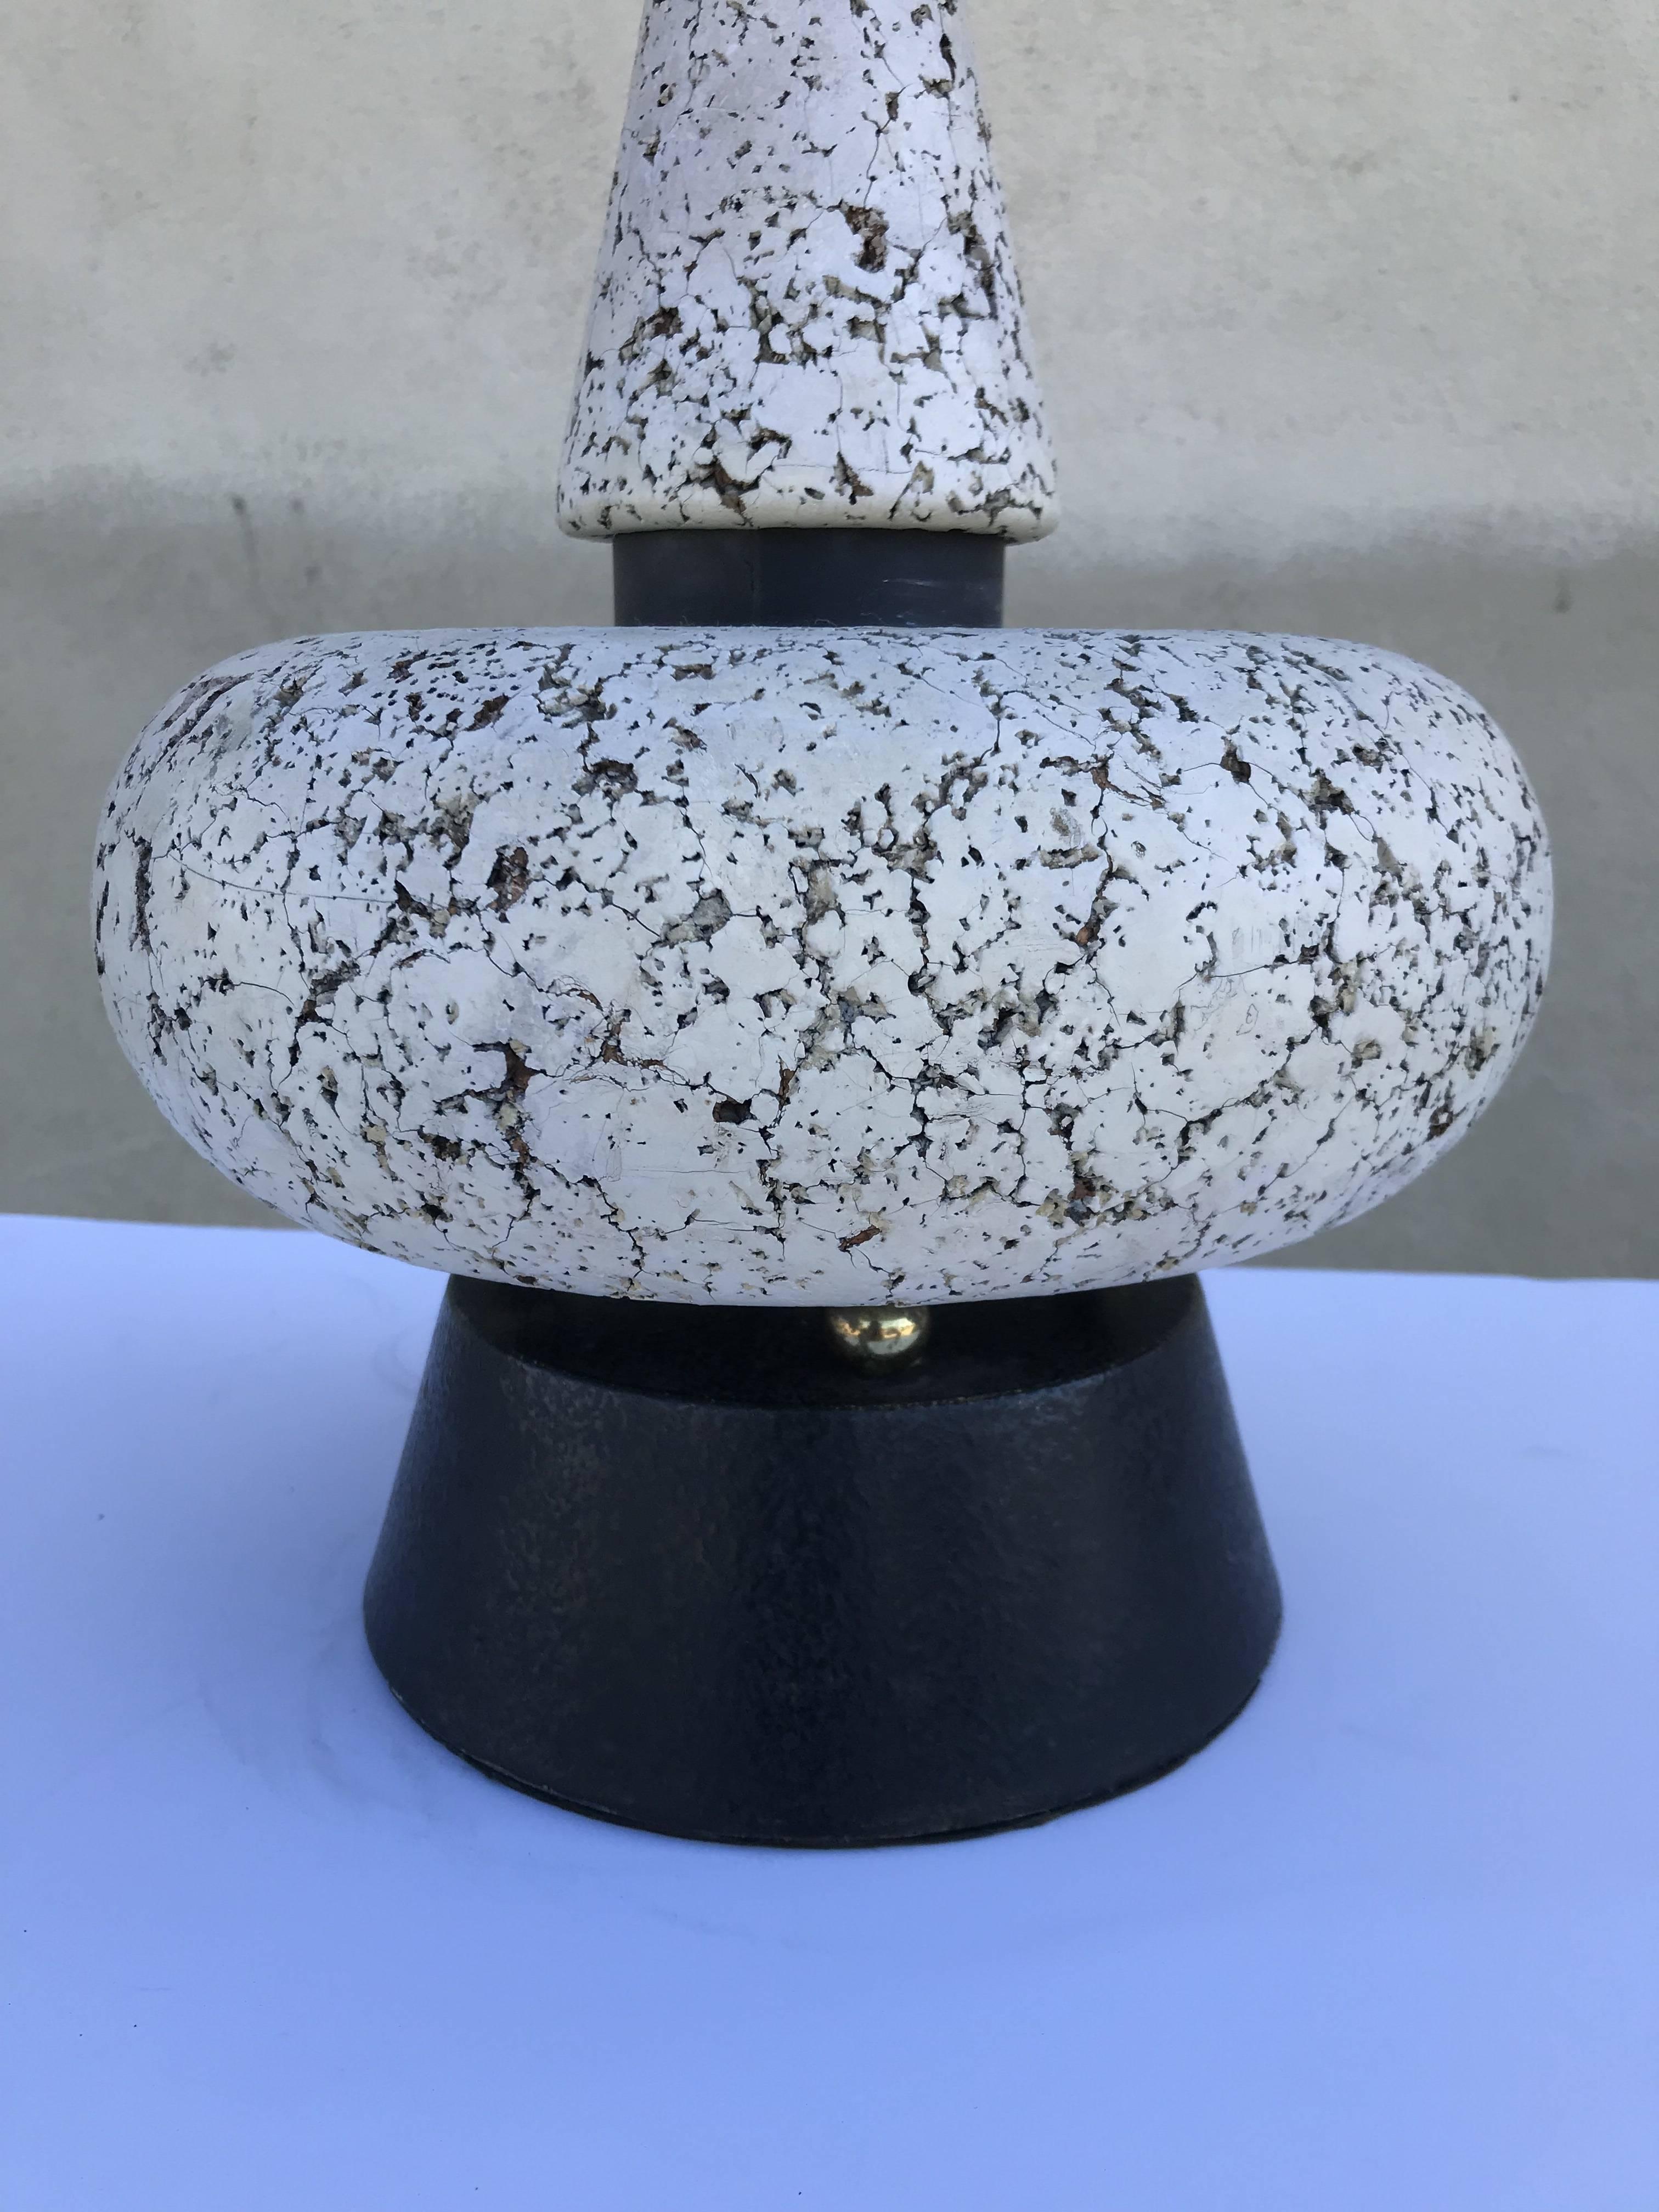 Rare table lamp is made several different geometric shapes of white cork, black painted metal and brass. Measures 34.5